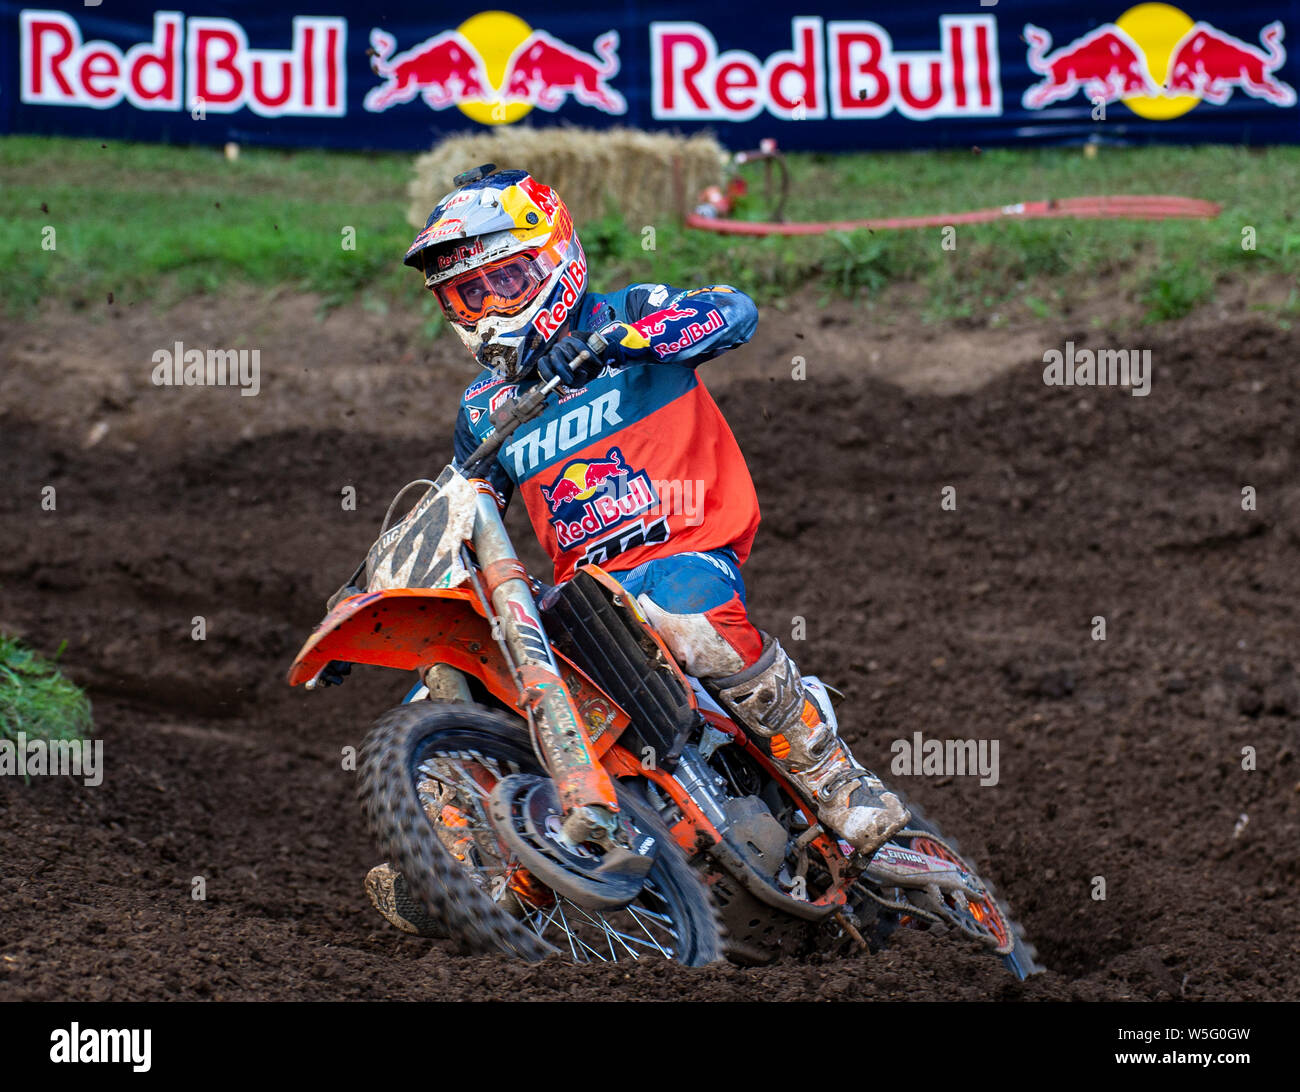 Washougal, WA USA. 27th July, 2019. # 2 Cooper Webb coming out of turn 25 during the Lucas Oil Pro Motocross Washougal National 450 class championship at Washougal MX park Washougal, WA Thurman James/CSM/Alamy Live News Stock Photo